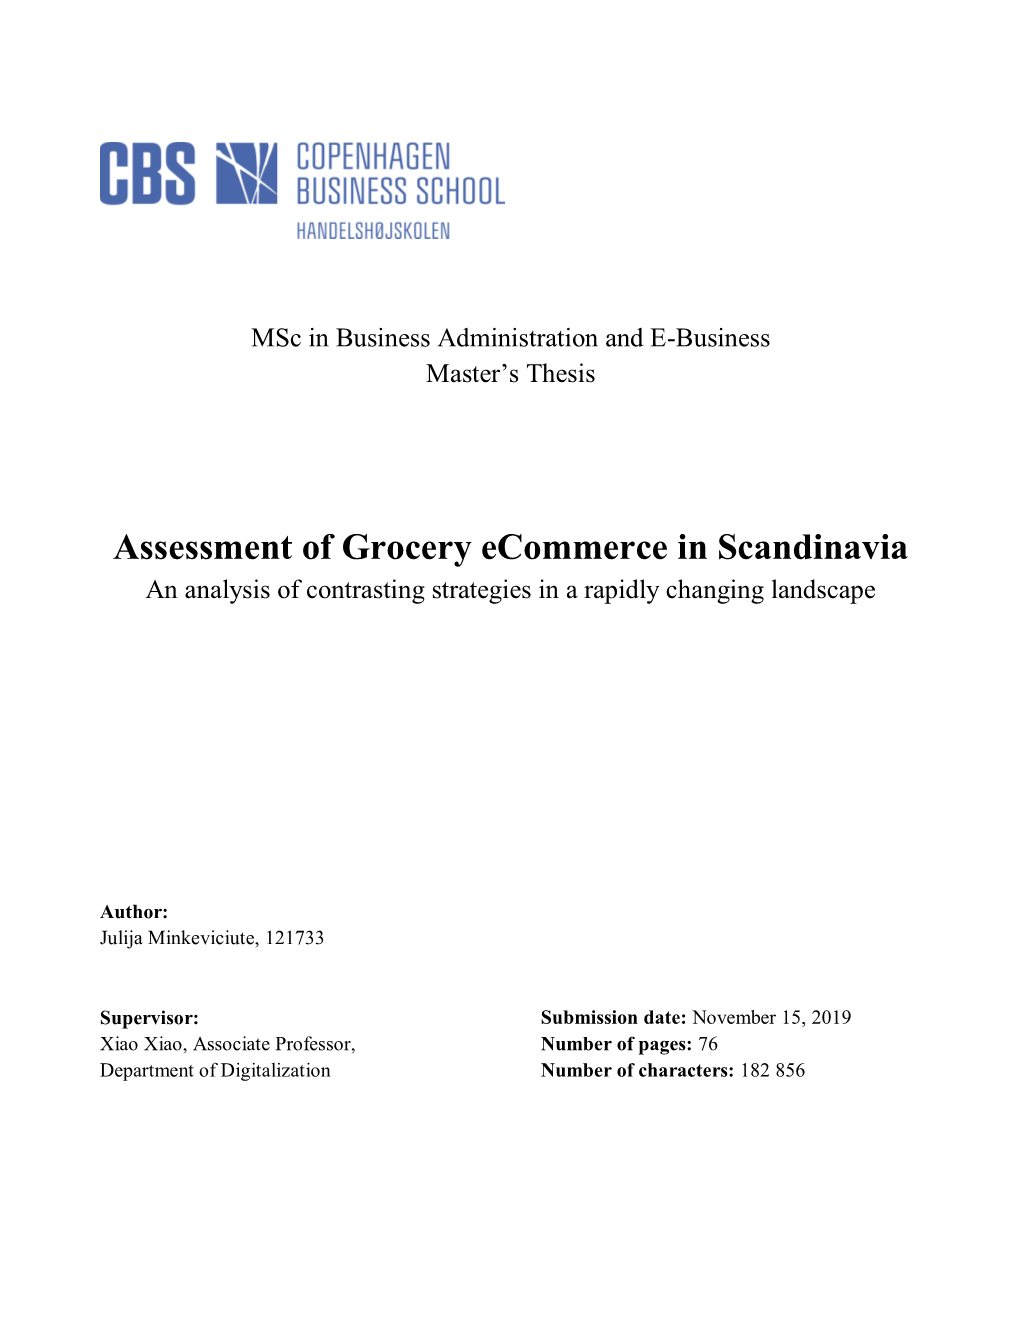 Assessment of Grocery Ecommerce in Scandinavia an Analysis of Contrasting Strategies in a Rapidly Changing Landscape